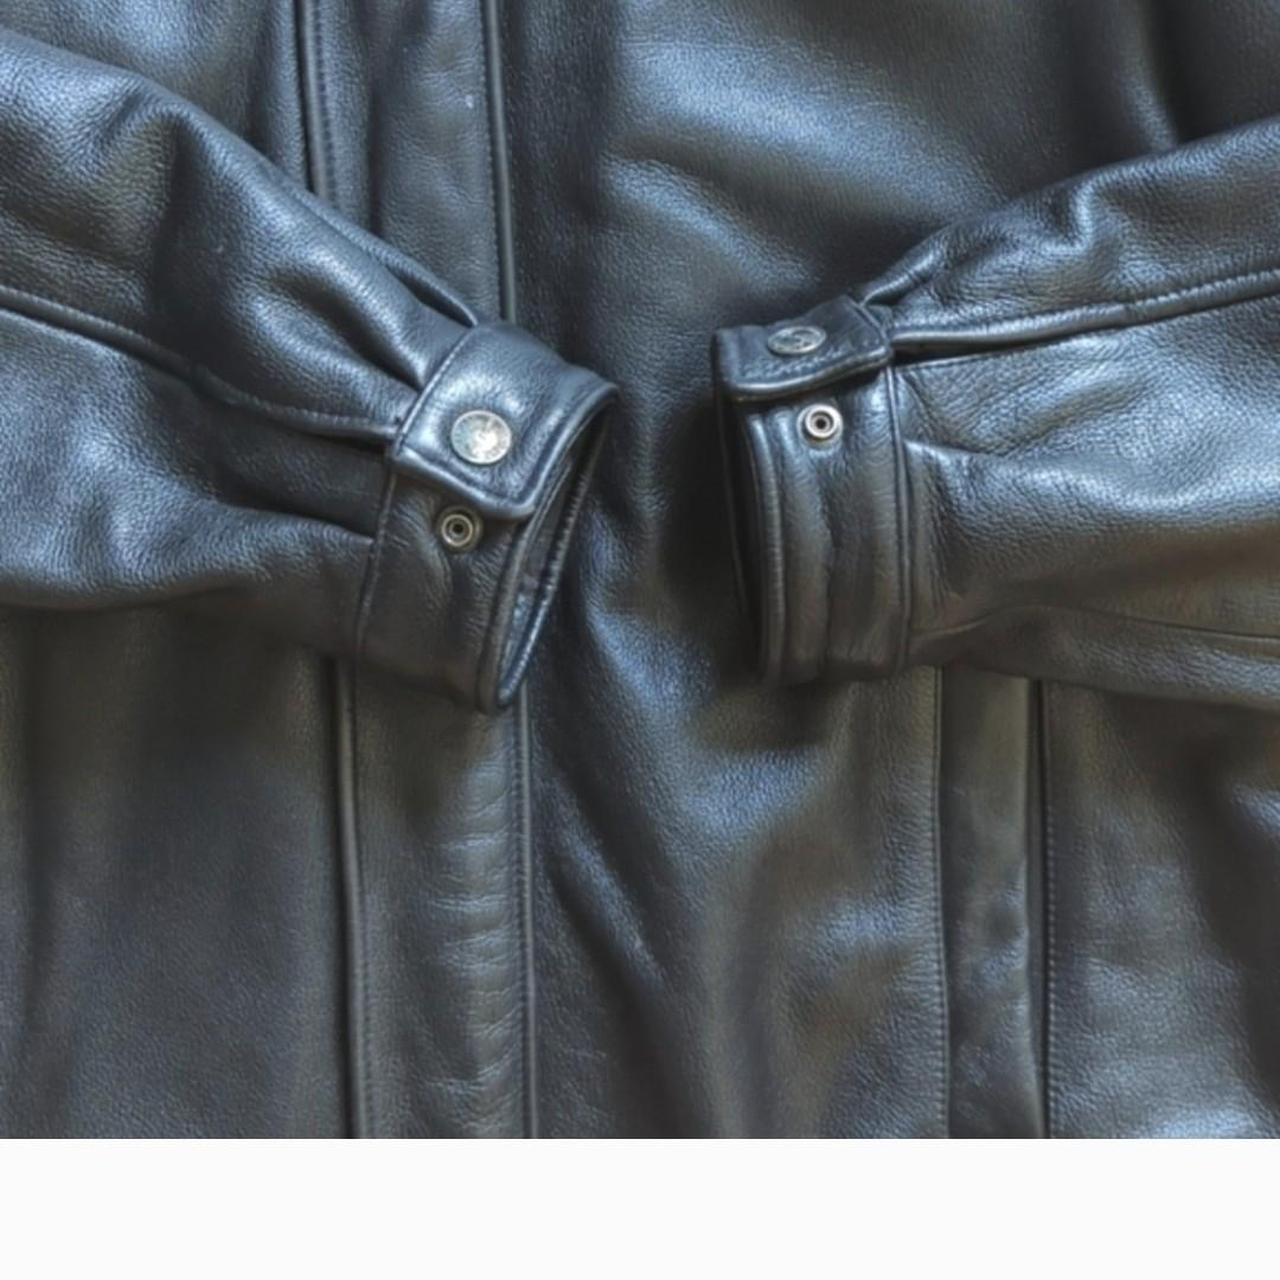 Vintage Wilson's leather jacket-small stain in the... - Depop